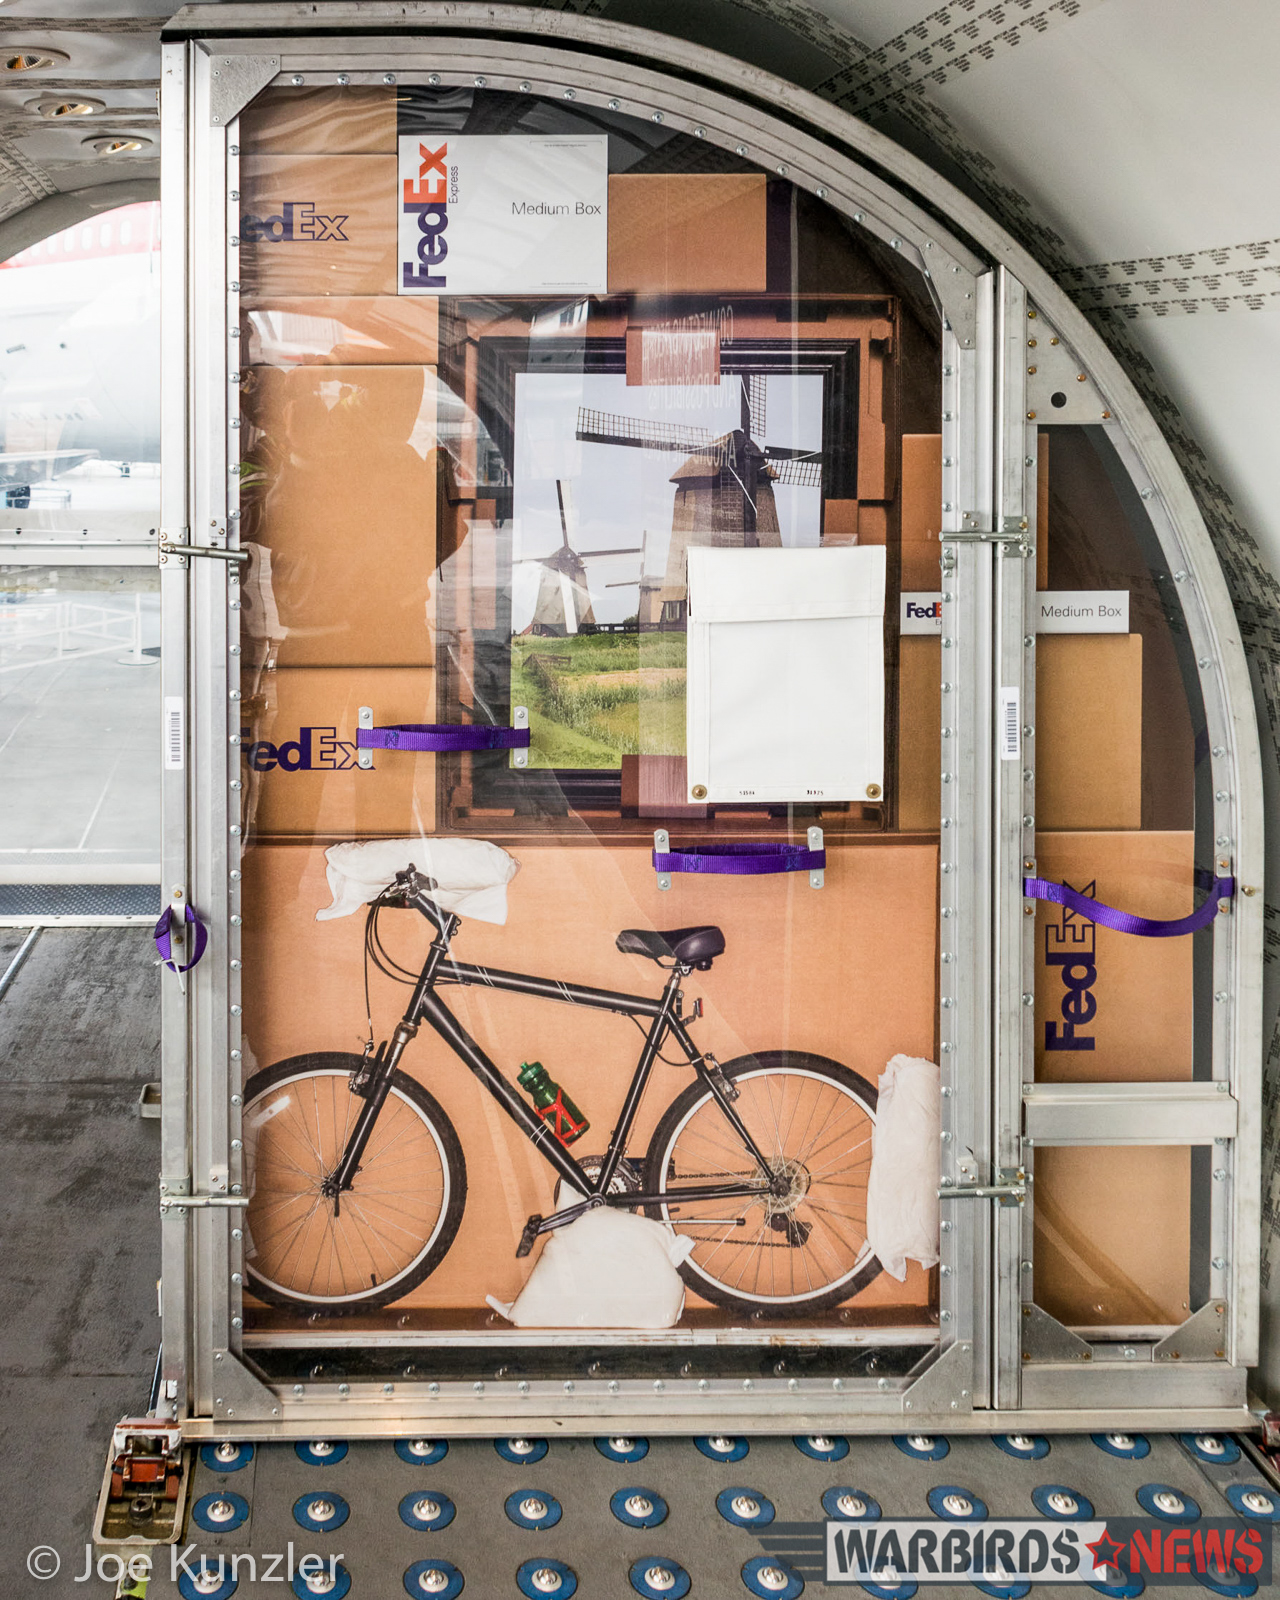 A slice of FedEx cargo showing how the aircraft would hold the shipping pallets. (photo by Joe Kunzler)